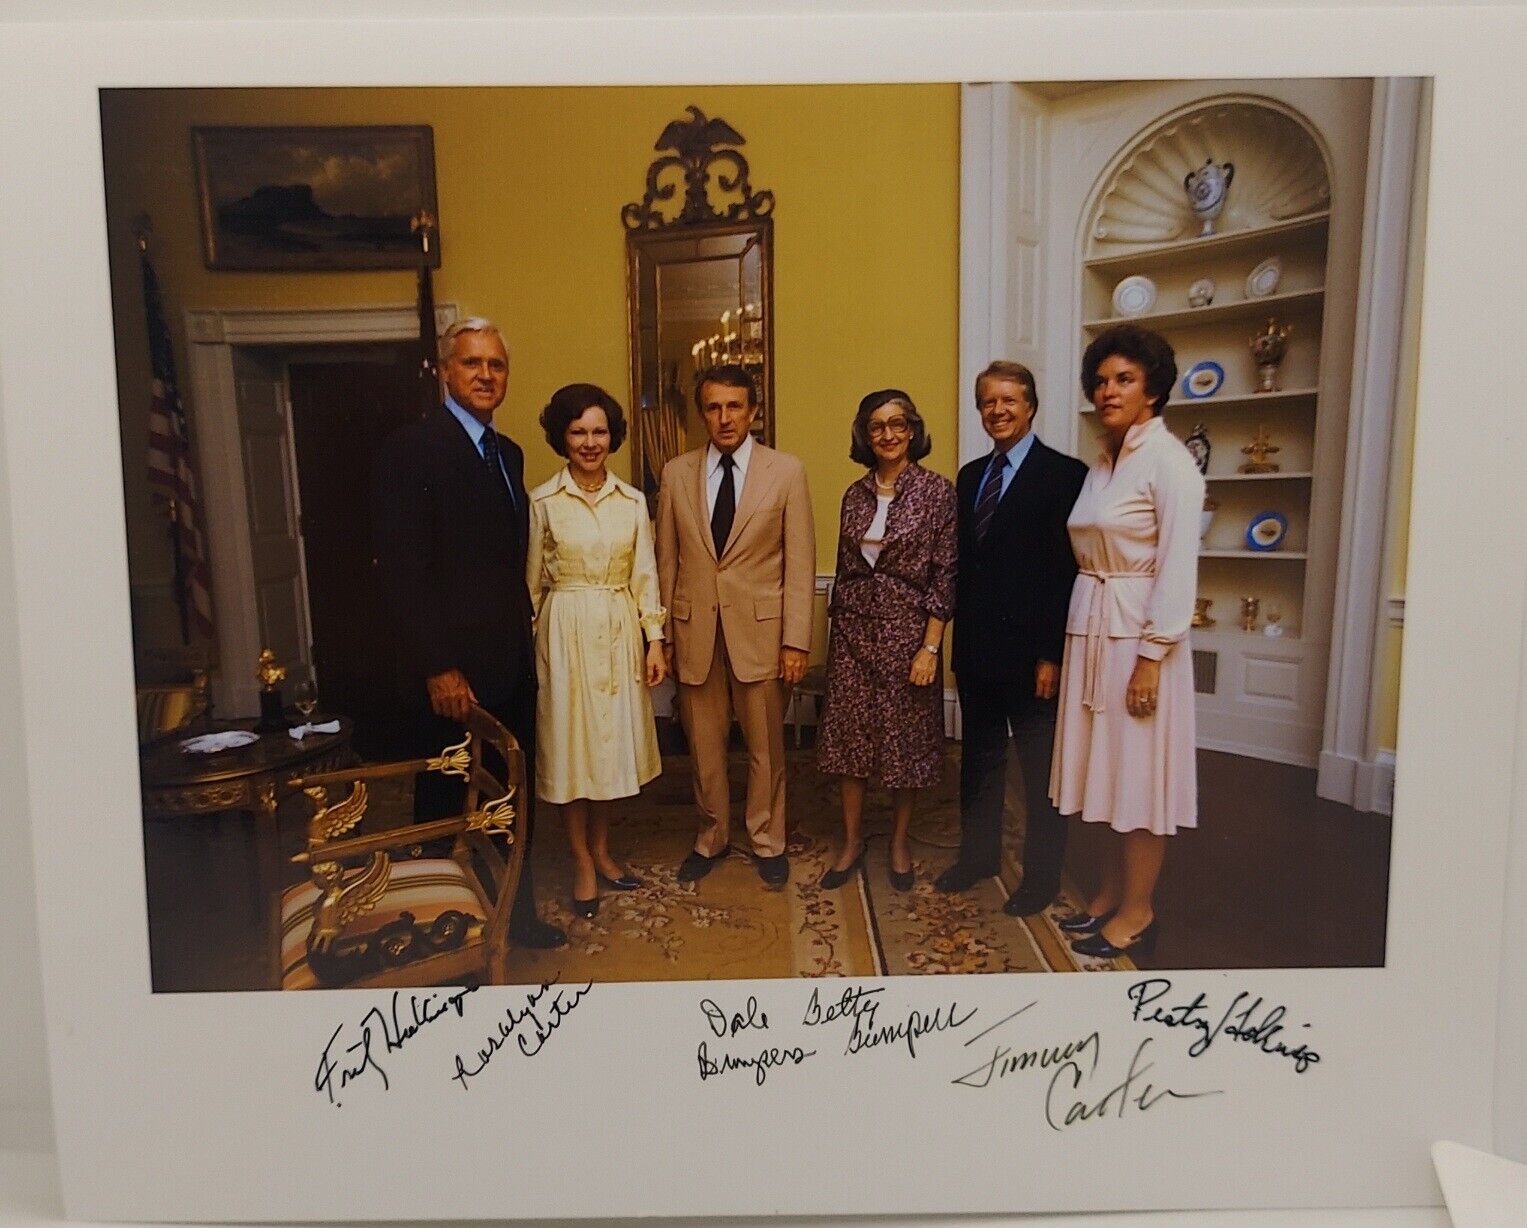  Jimmy Carter Rosalynn Carter Ernest Hollings & Dale Bumpers Signed 8x10 Photo 